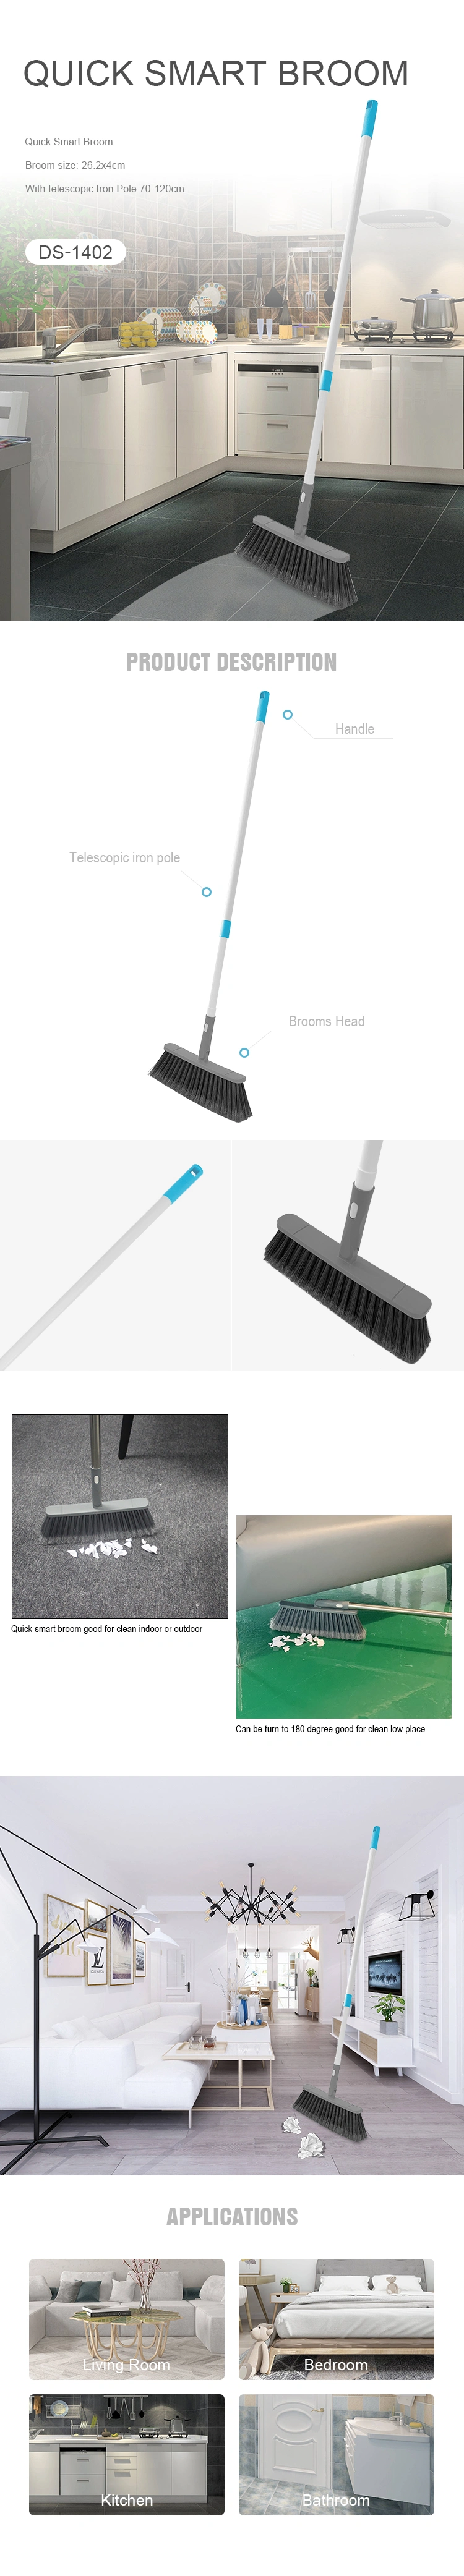 TPR rubber Broom with squeege for floor cleaning